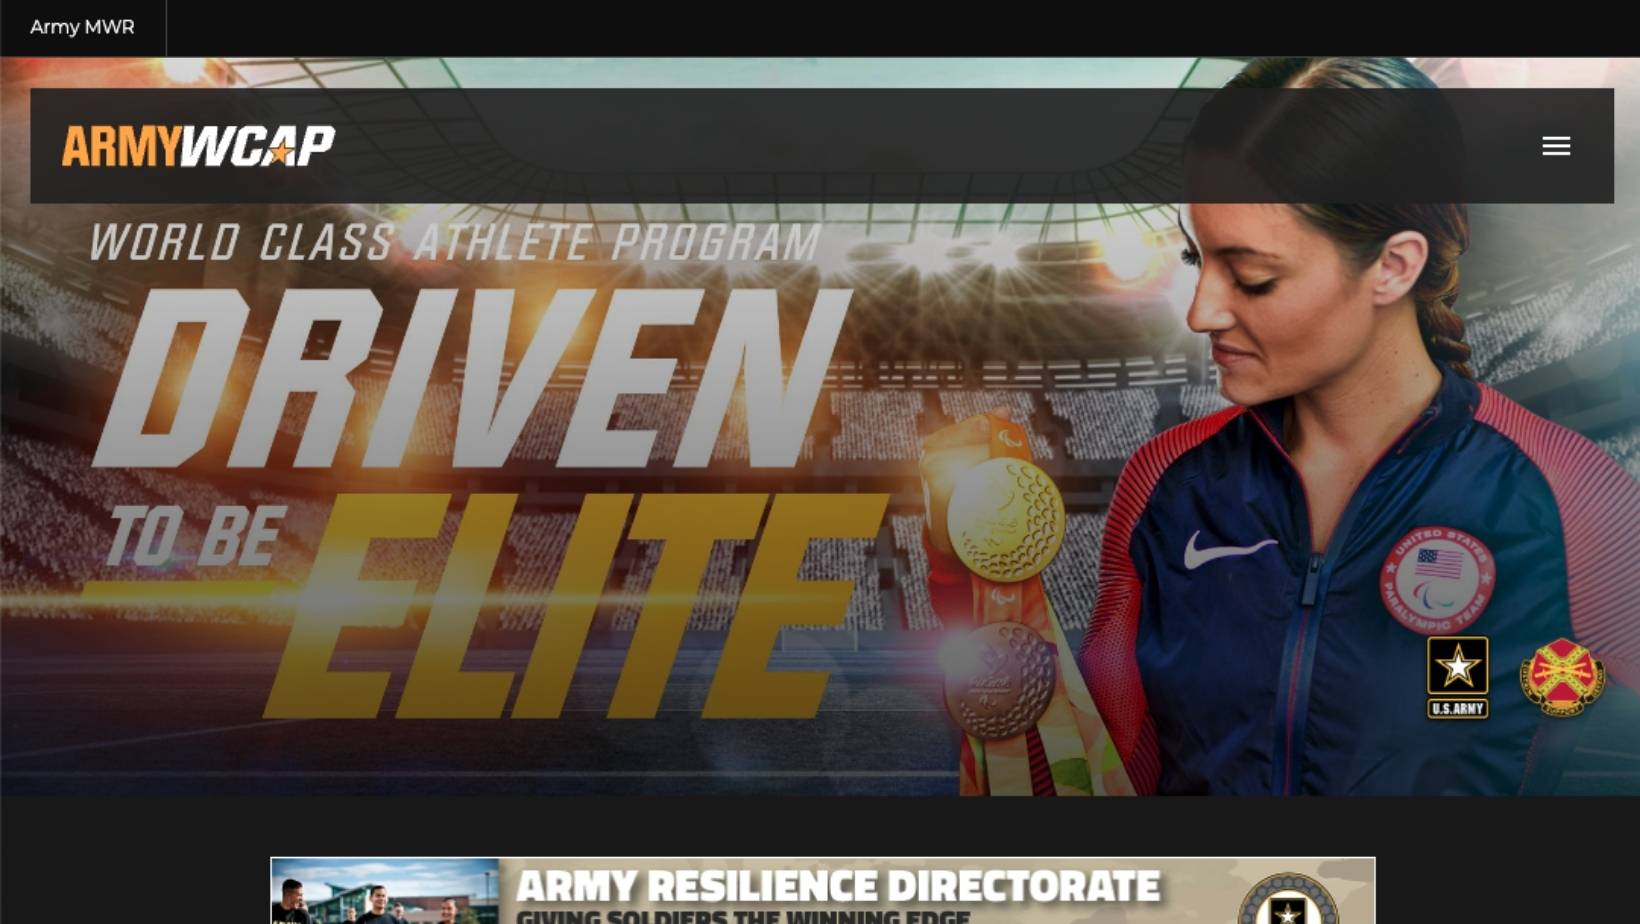 Screenshot of US Army WCAP homepage with a header image of soldiers in action and navigation links to news, sports, about the program and more.